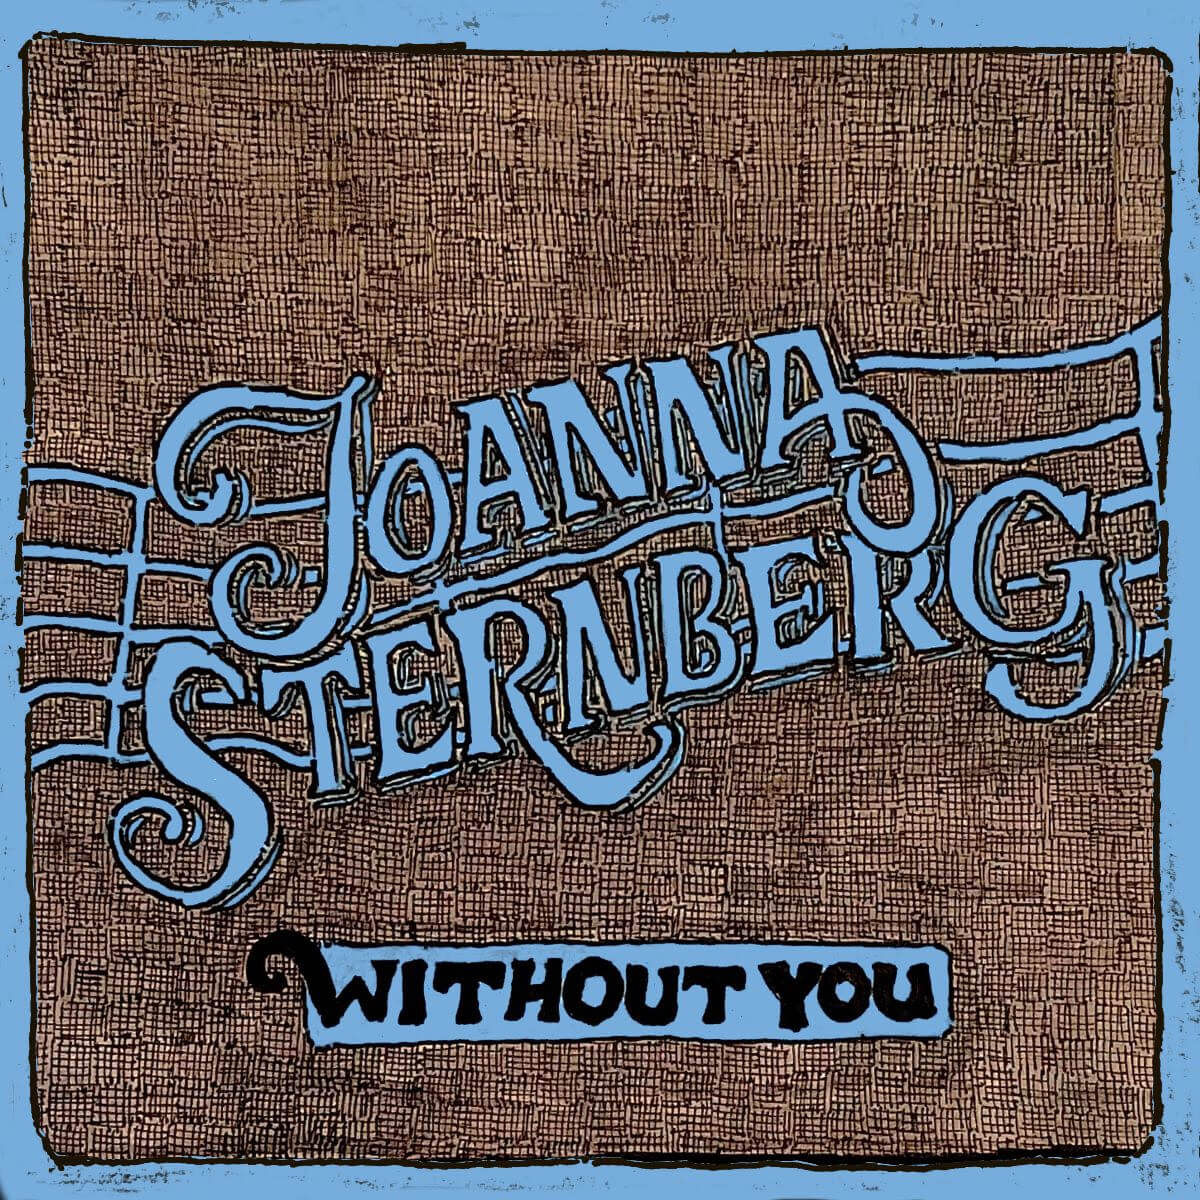 Joanna Sternberg Shares new single "Without You." The track is off the artist's album I’ve Got Me, now available via Fat Possum Records